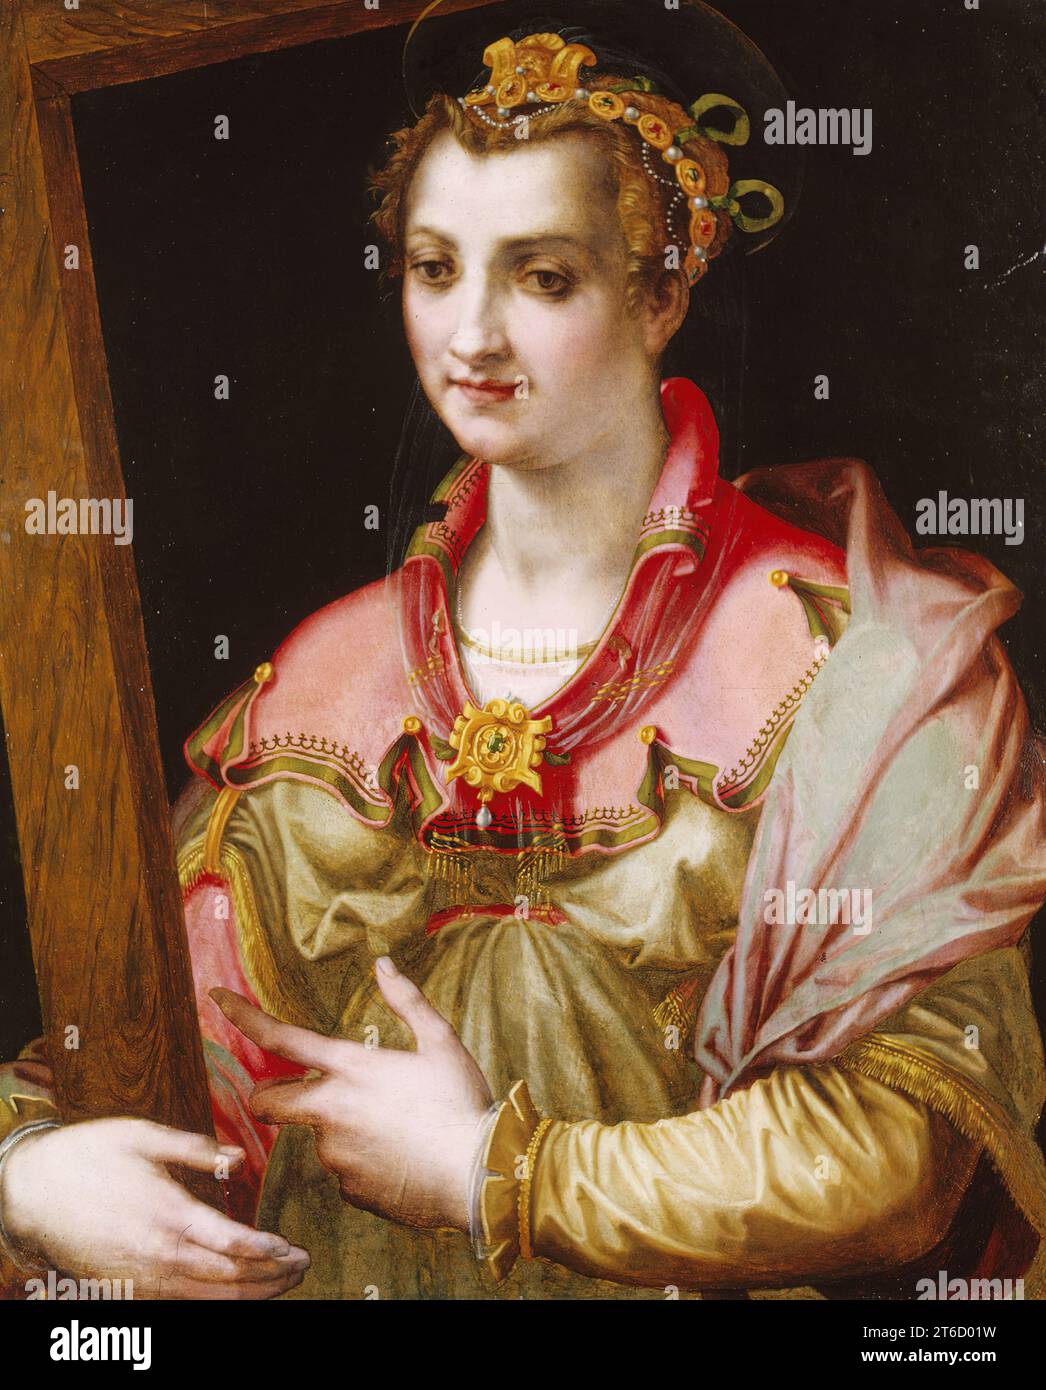 Saint Helena, c1575. St. Helena (ca. 247-ca. 327) was the mother of Emperor Constantine the Great (ca. 288-337), who, according to tradition, christianized the Roman Empire. Helena is shown holding the True Cross (the cross on which Christ was crucified), which she is said to have discovered in Jerusalem. Her elaborate headdress and idealized, slightly masculine facial features reveal the artist's study of Michelangelo's so-called &quot;teste divine&quot; (&quot;divine heads&quot;), admired for their great beauty. Stock Photo